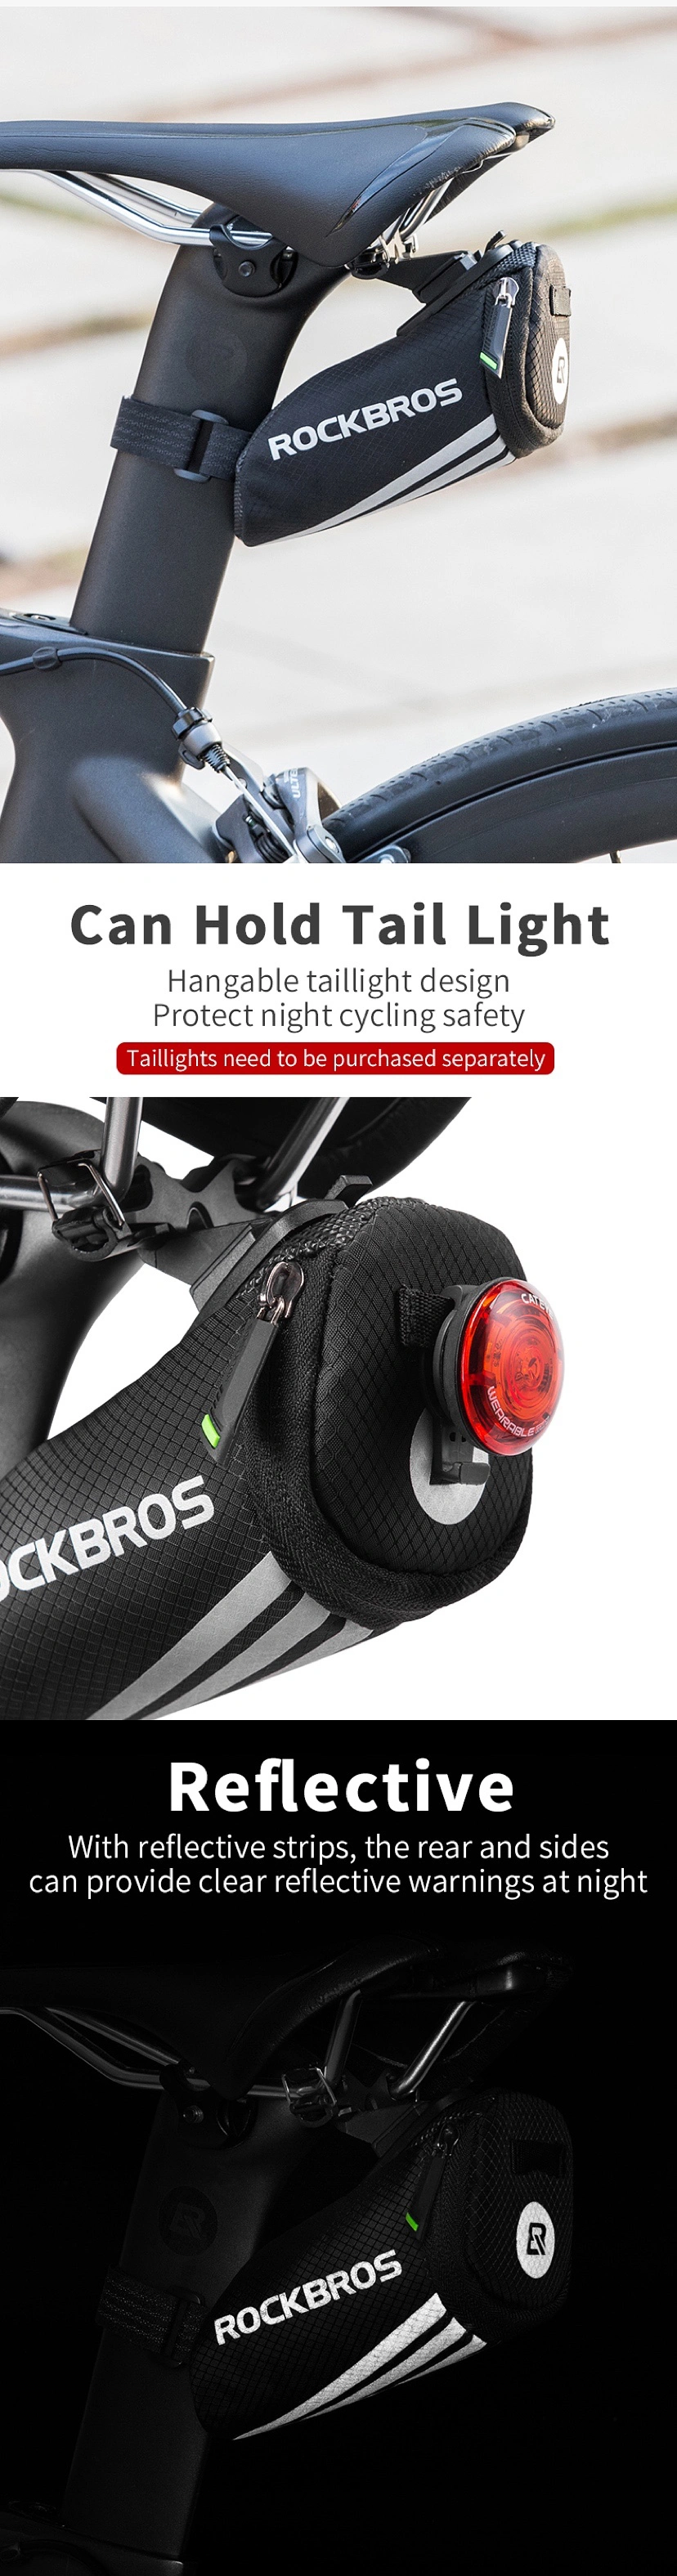 Bicycle Equipment Accessories Collapsible Rear Bag Bike Rear Seat Bag